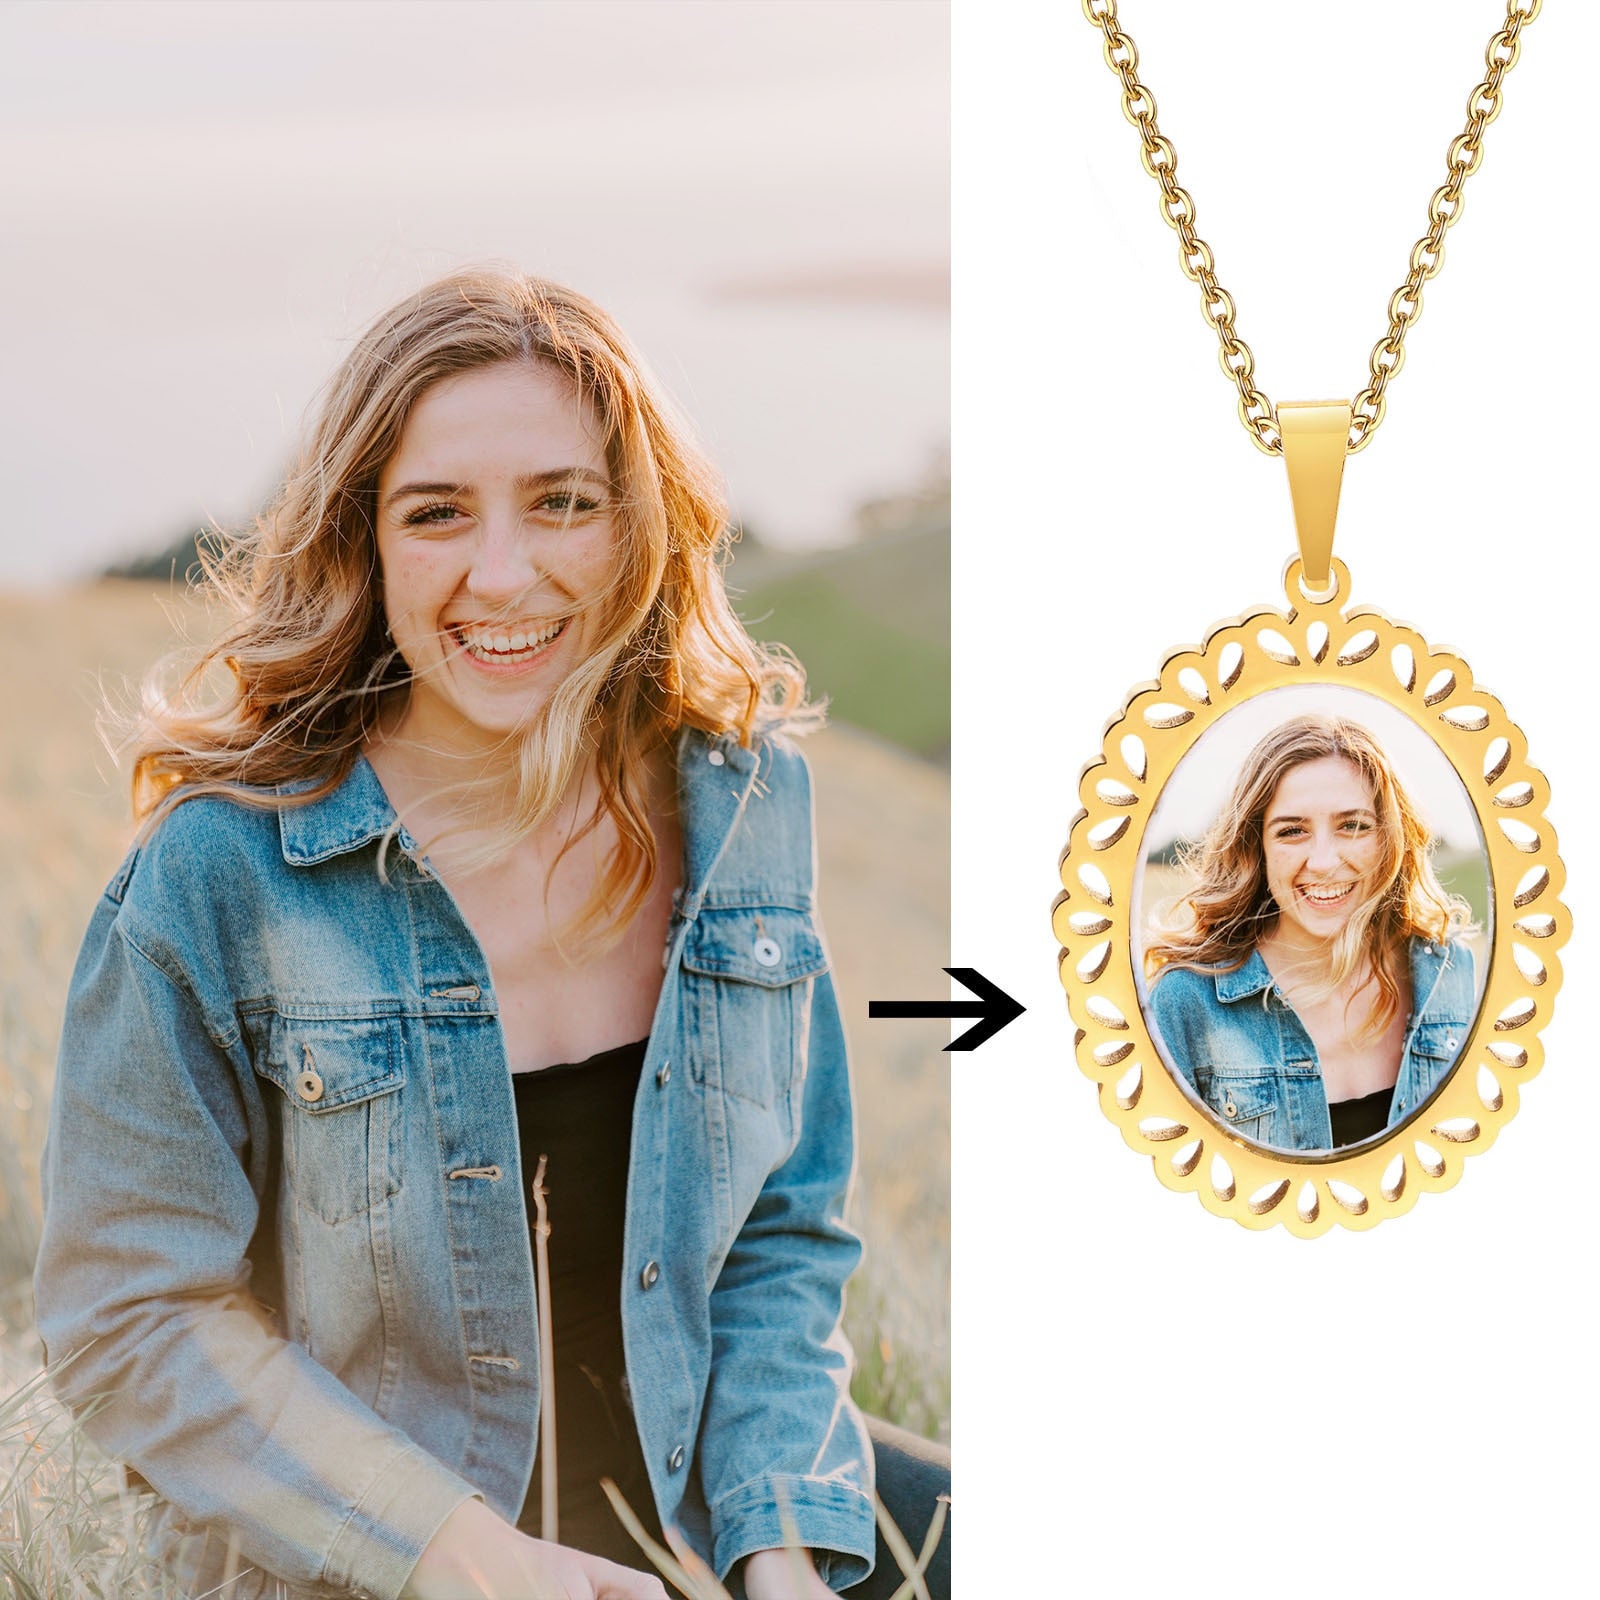 Vnox Free Custom Photo Picture Necklaces for Women, Personalize Words Stainless Steel Pendant,Mothers or Lover Gifts Jewelry - Charlie Dolly